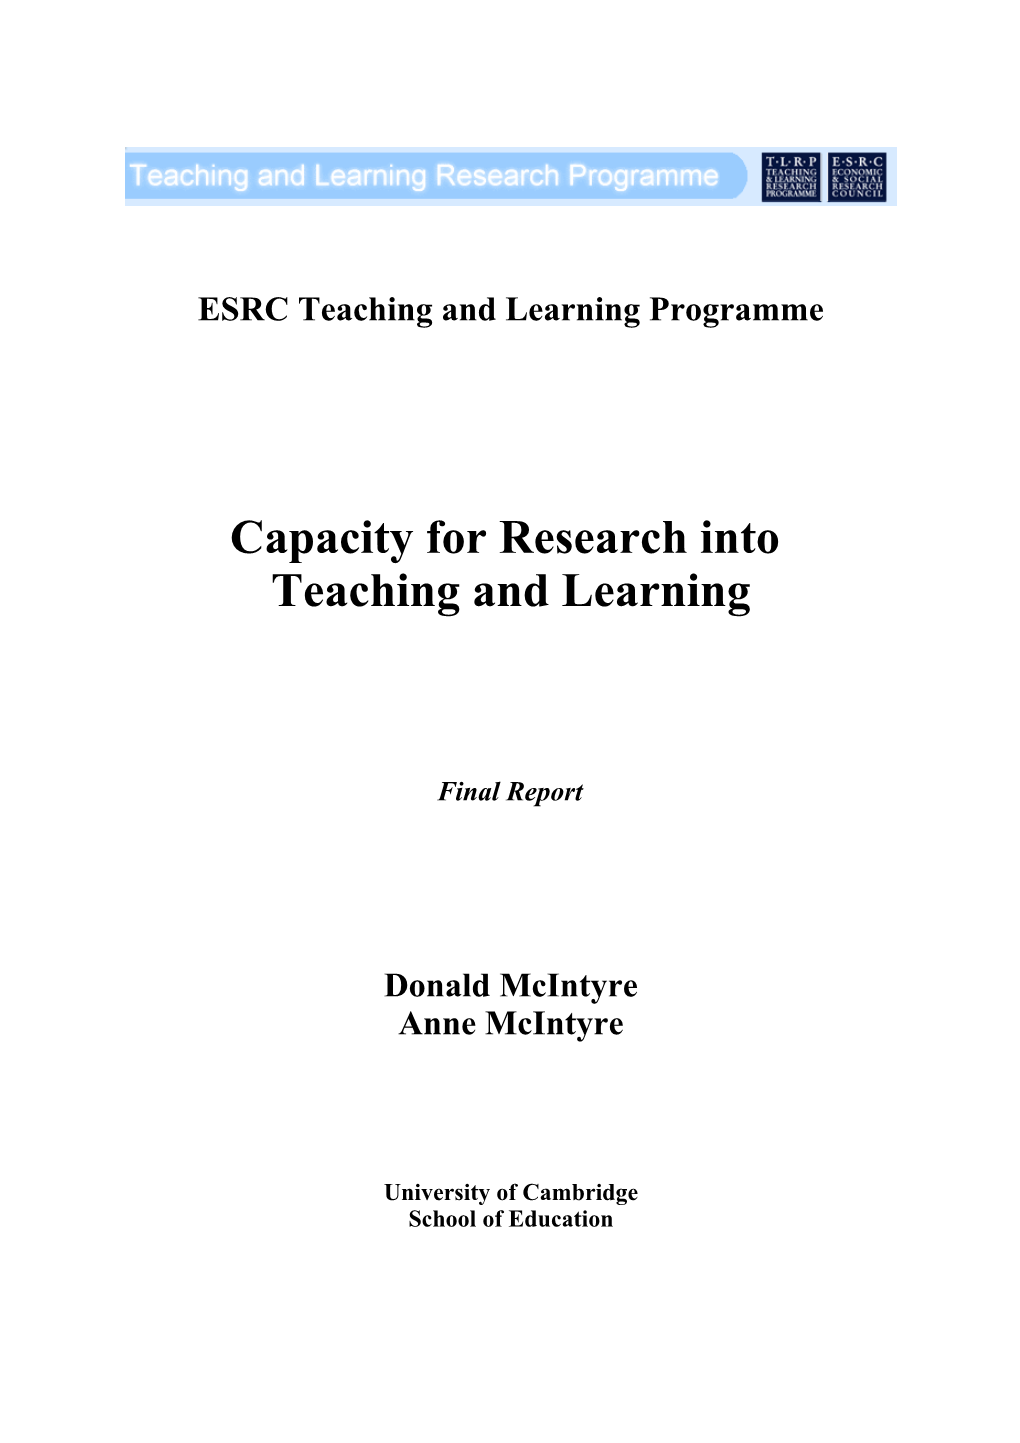 ESRC Teaching and Learning Programme